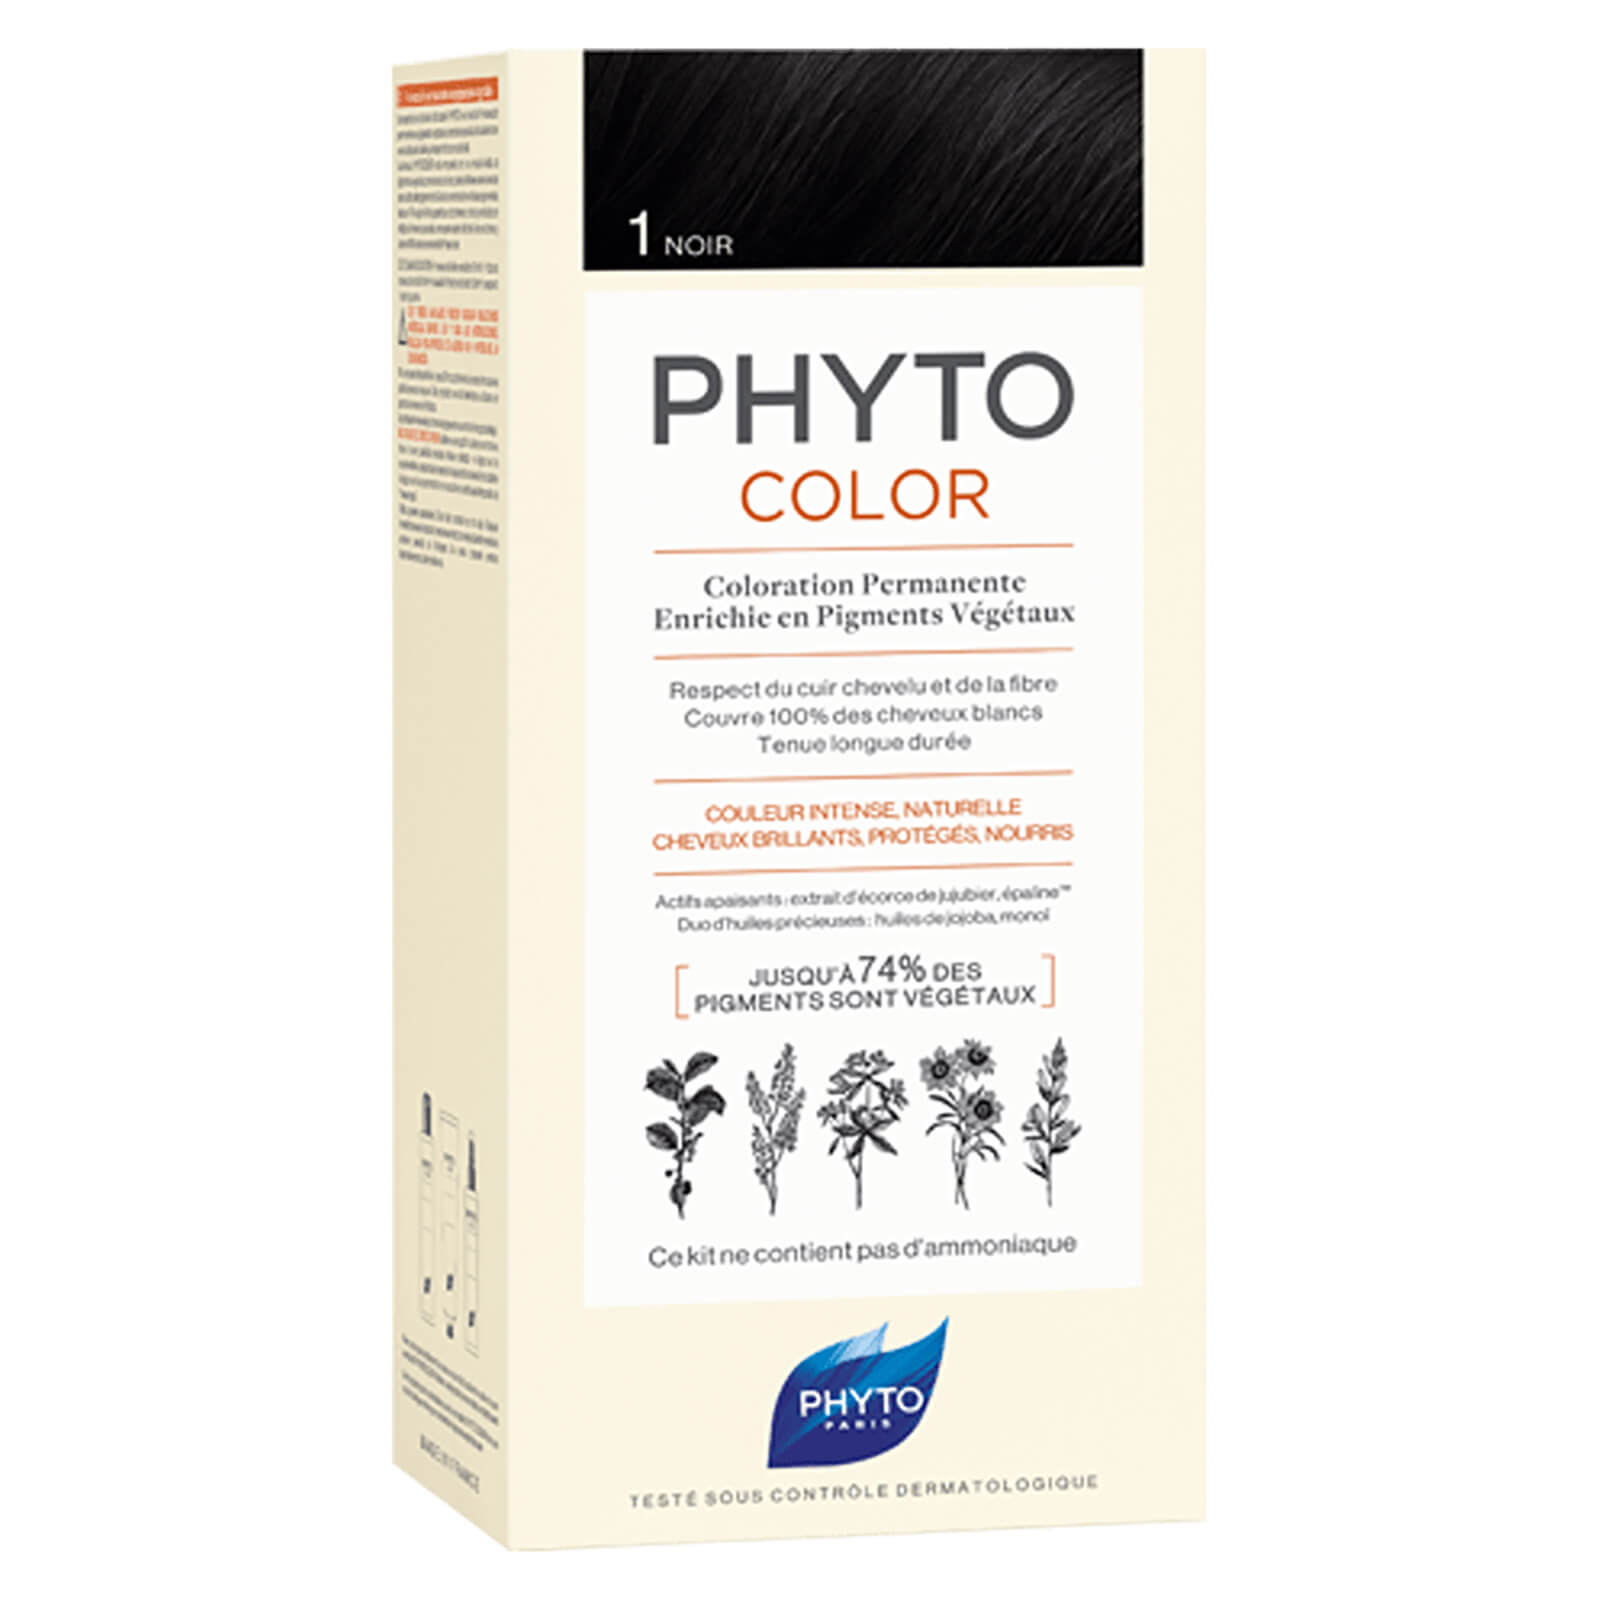 Phyto Hair Colour By Color - 1 Black 180g